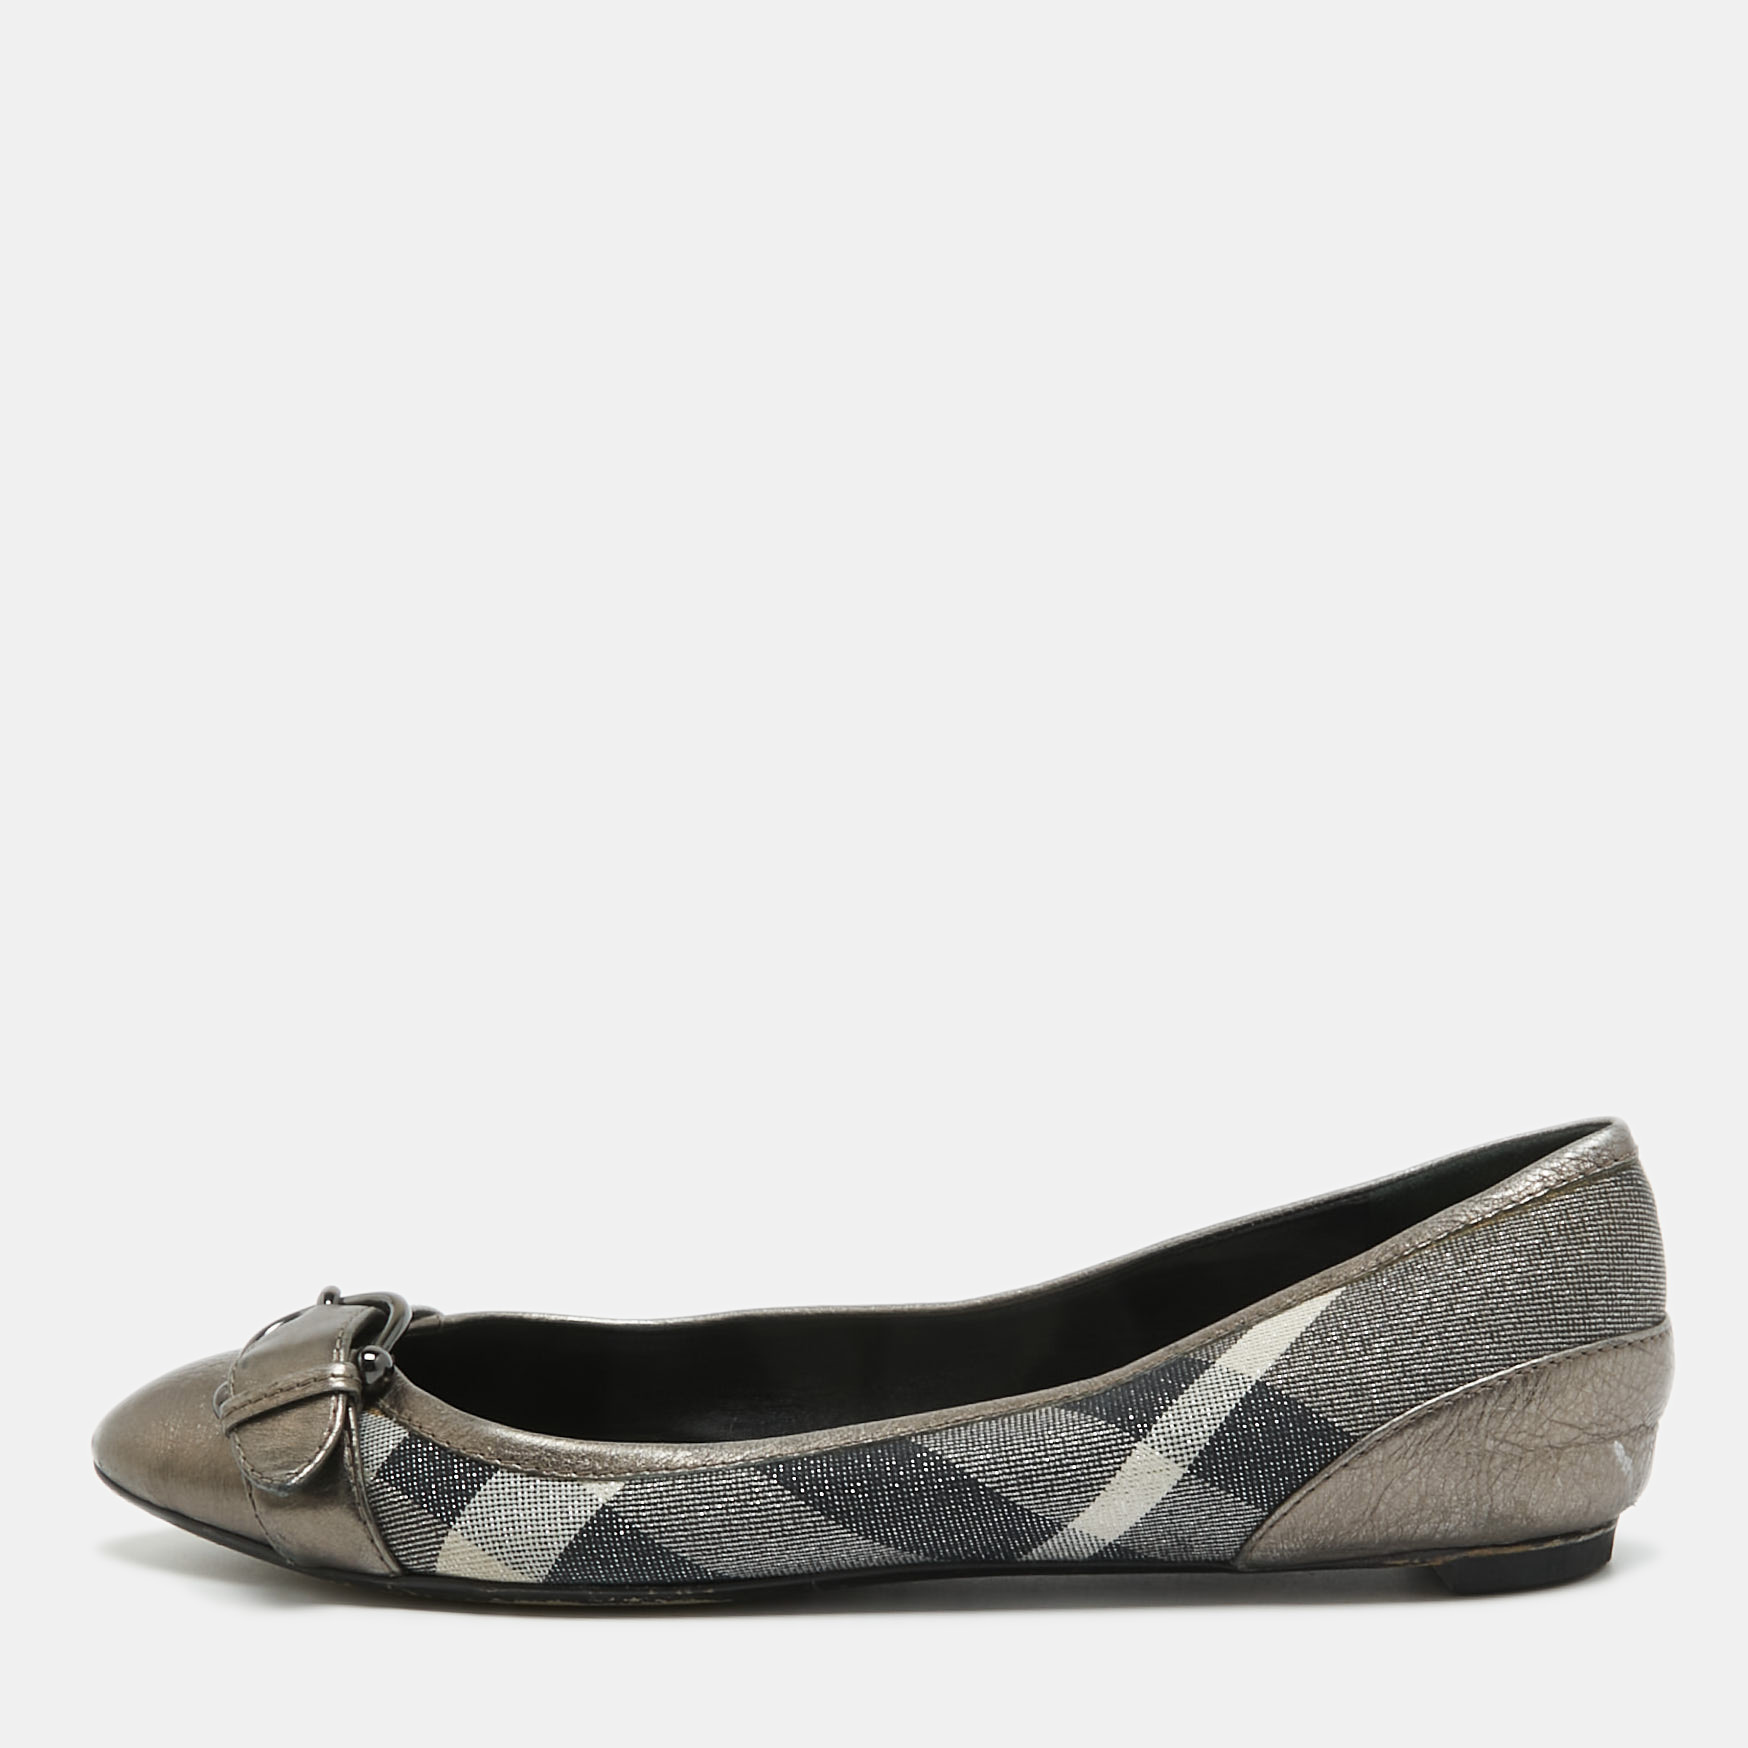 

Burberry Metallic Leather and Glitter Nova Check Canvas Pointed Toe Flats Size